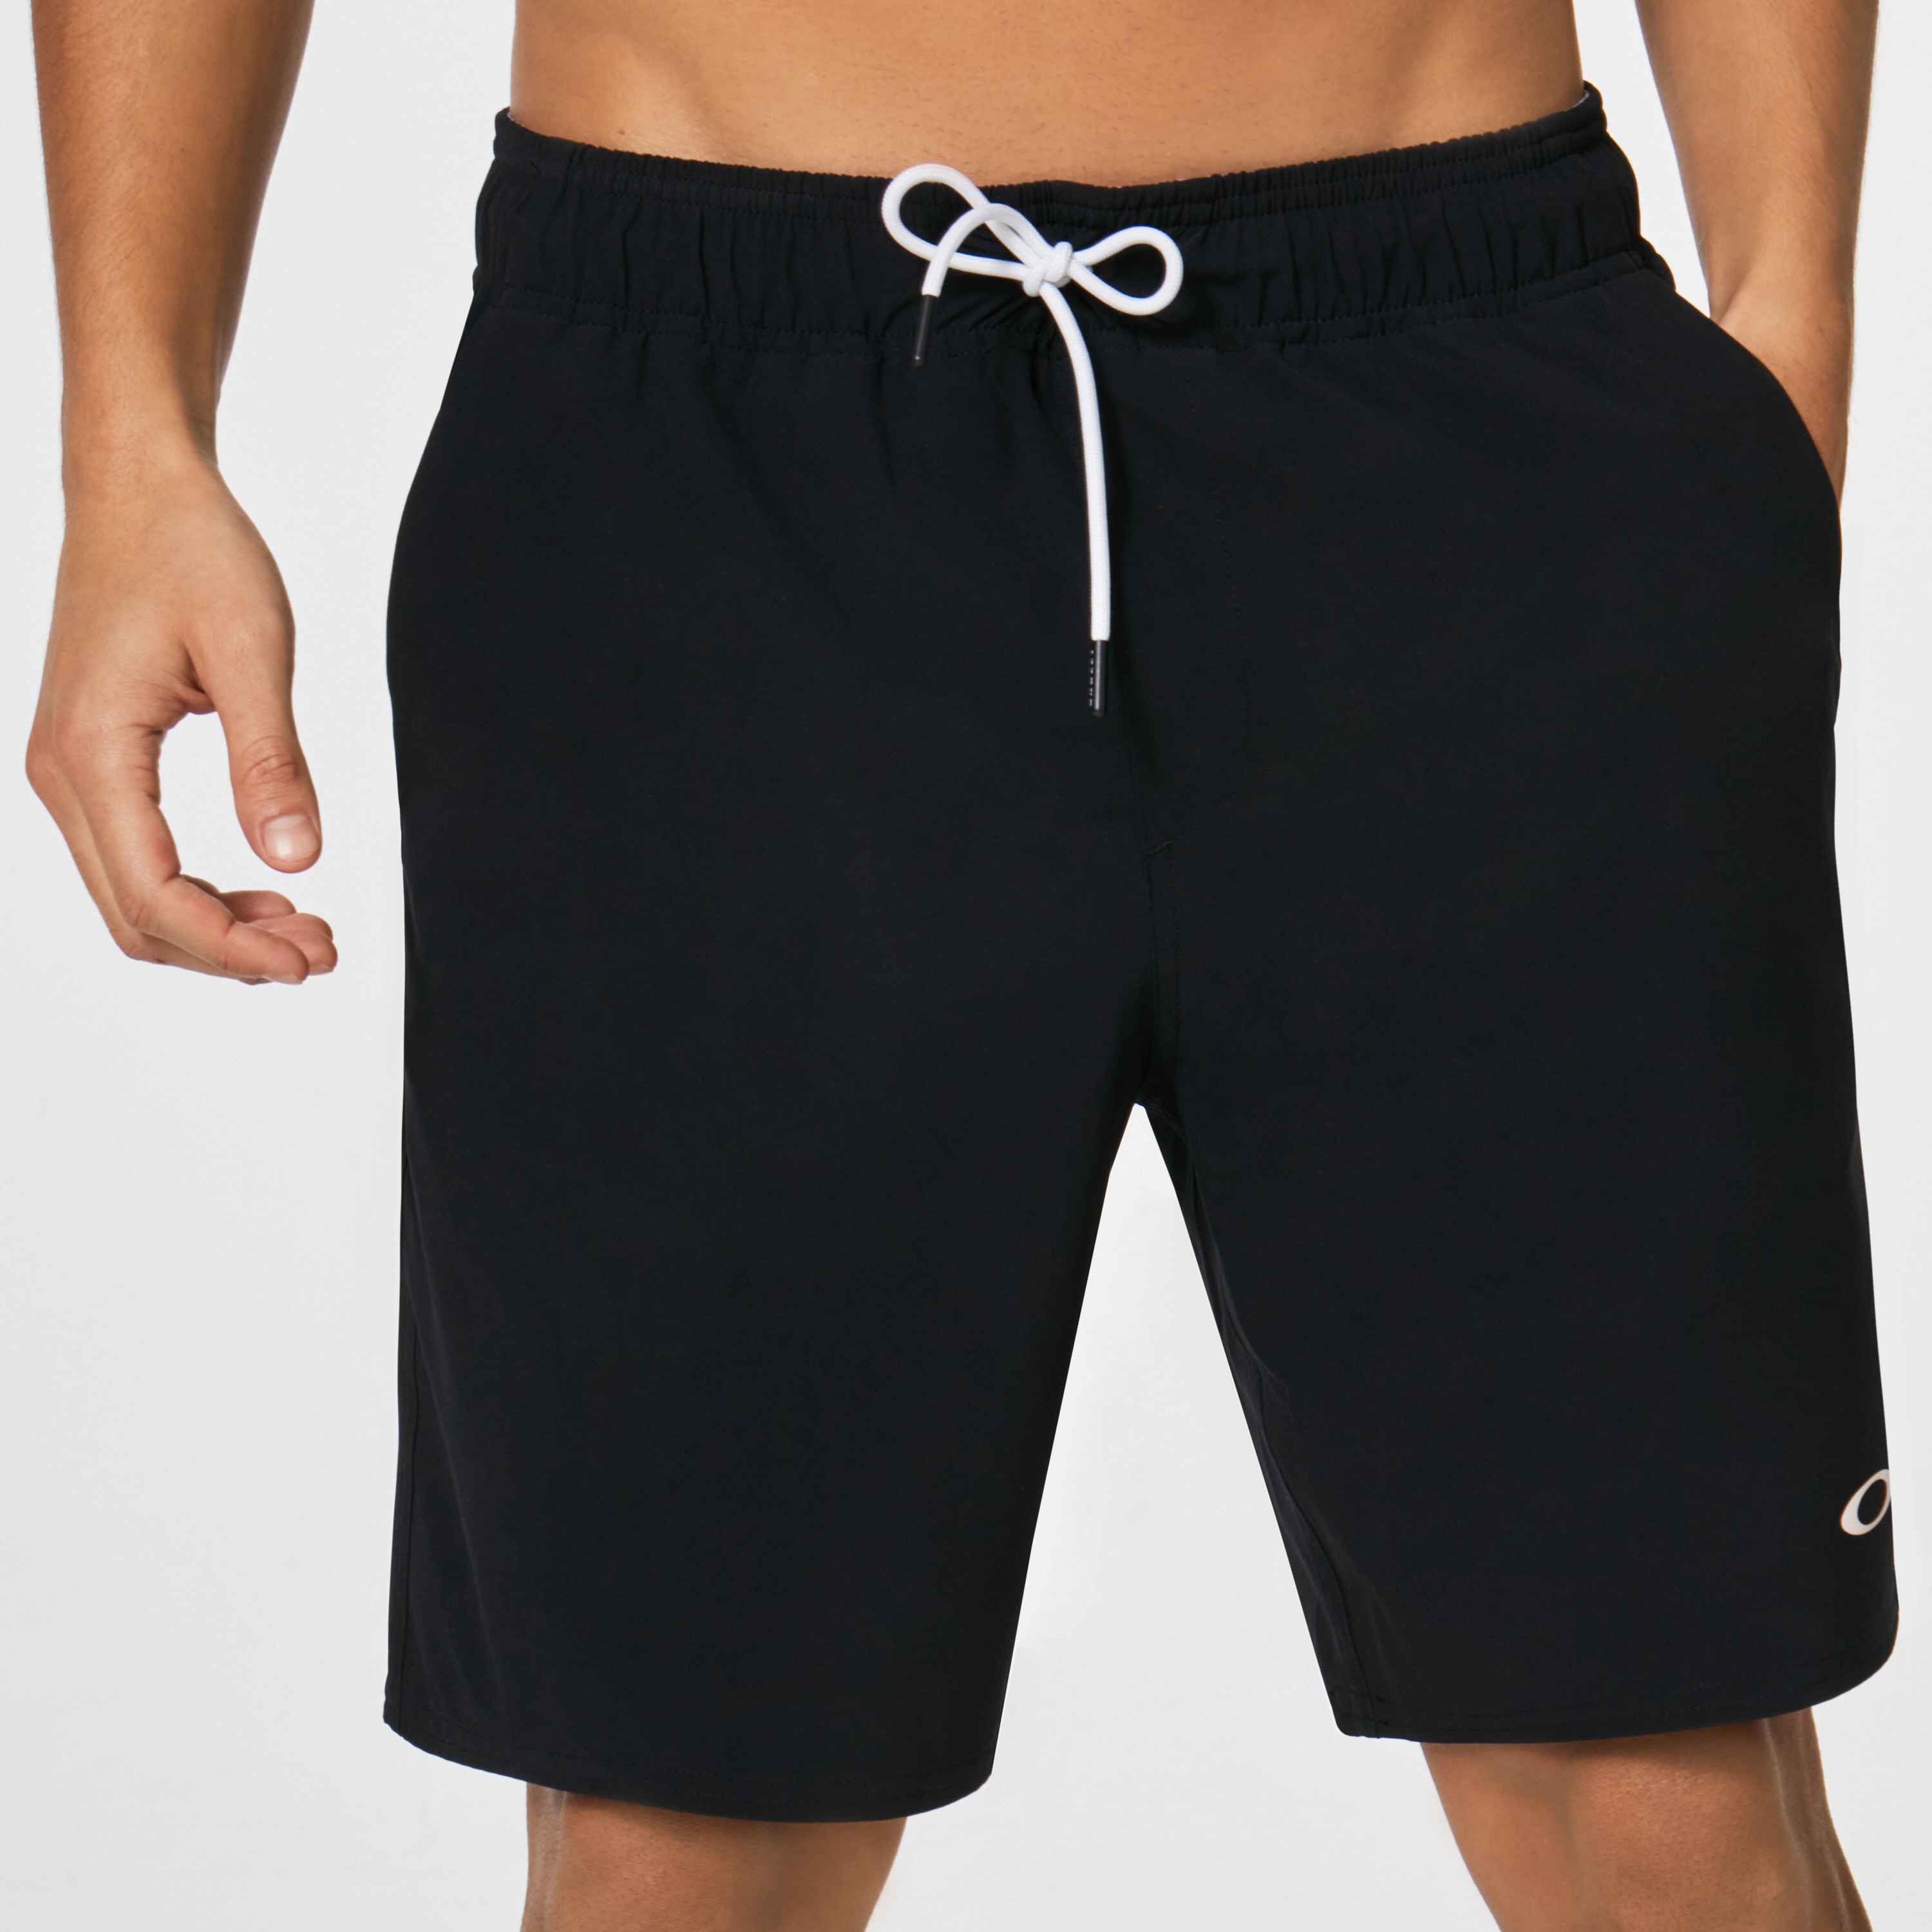 oakley ace volley 18 shorts